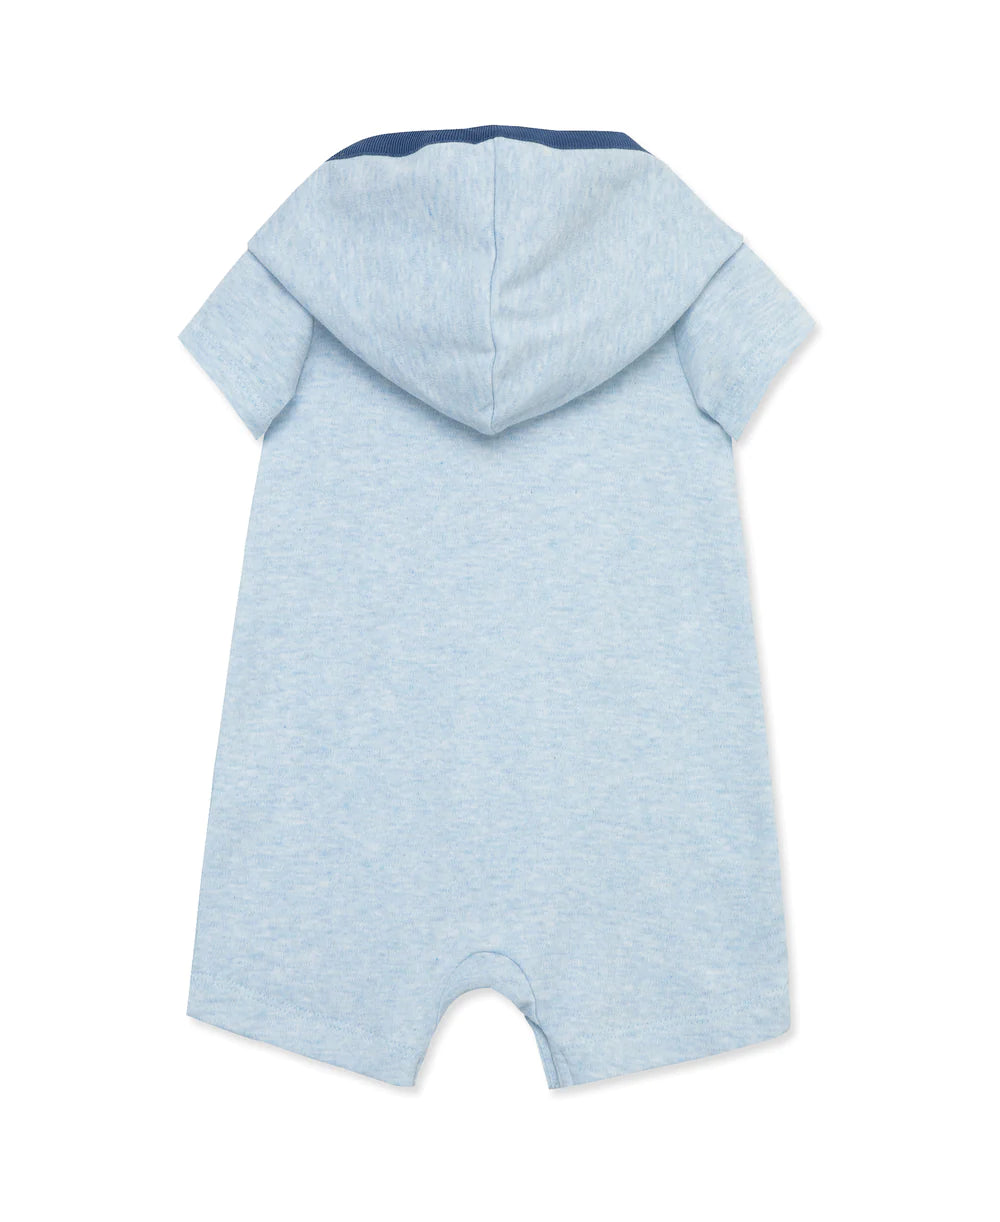 Haven & Co- Golf Hooded Romper